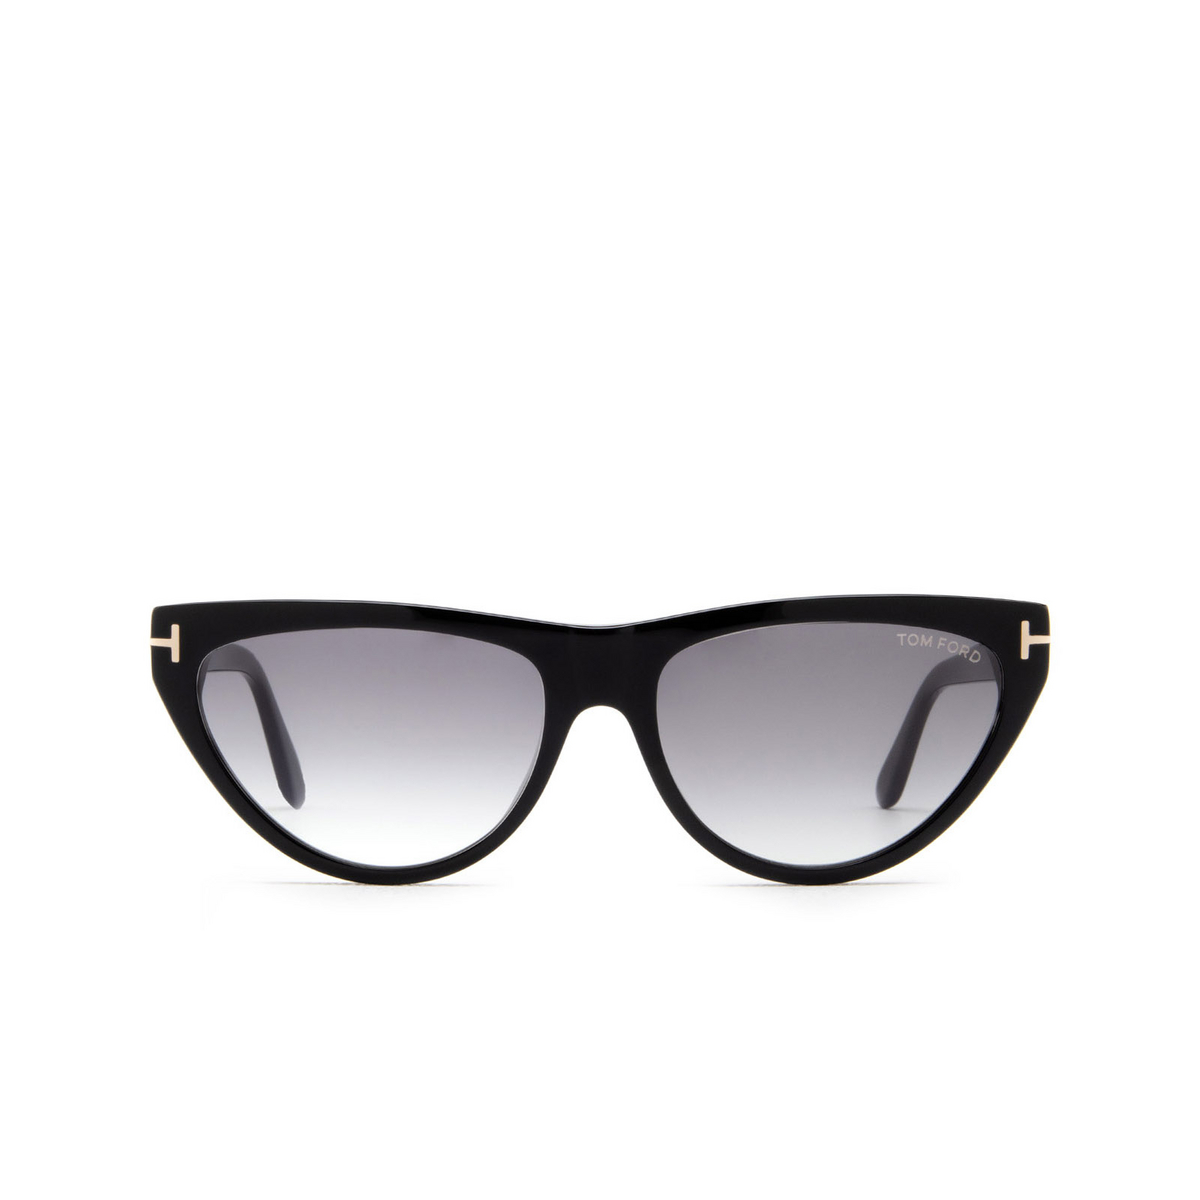 Tom Ford AMBER 02 Sunglasses 01B Black - front view